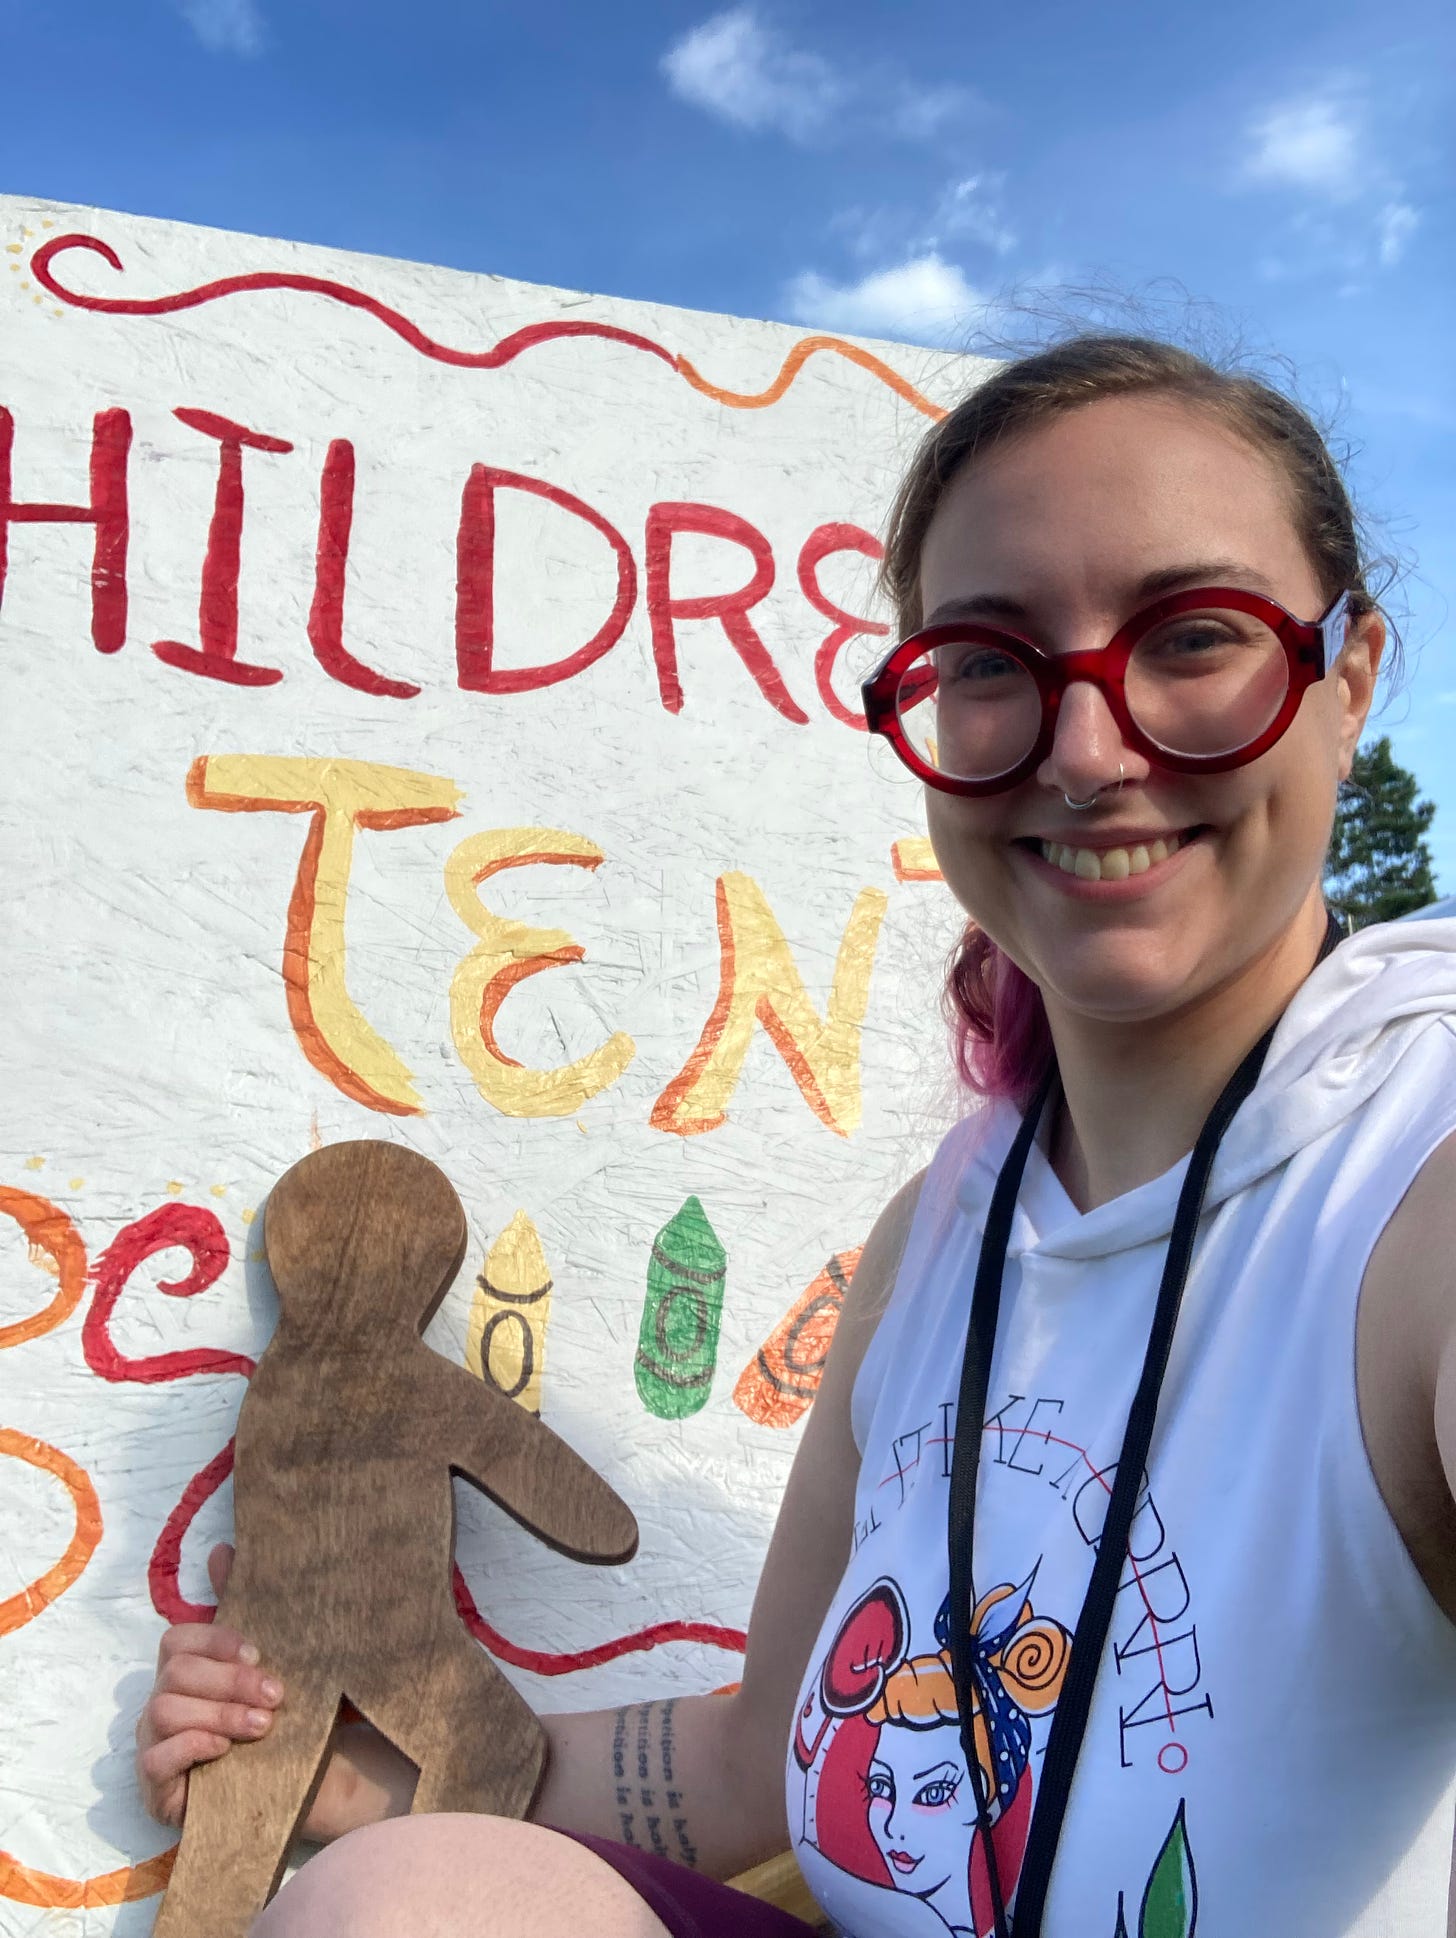 A photo of the author, a white woman with light brown hair and big red glasses, posing with a large wooden person of God in front of a sign reading "Children's Tent"